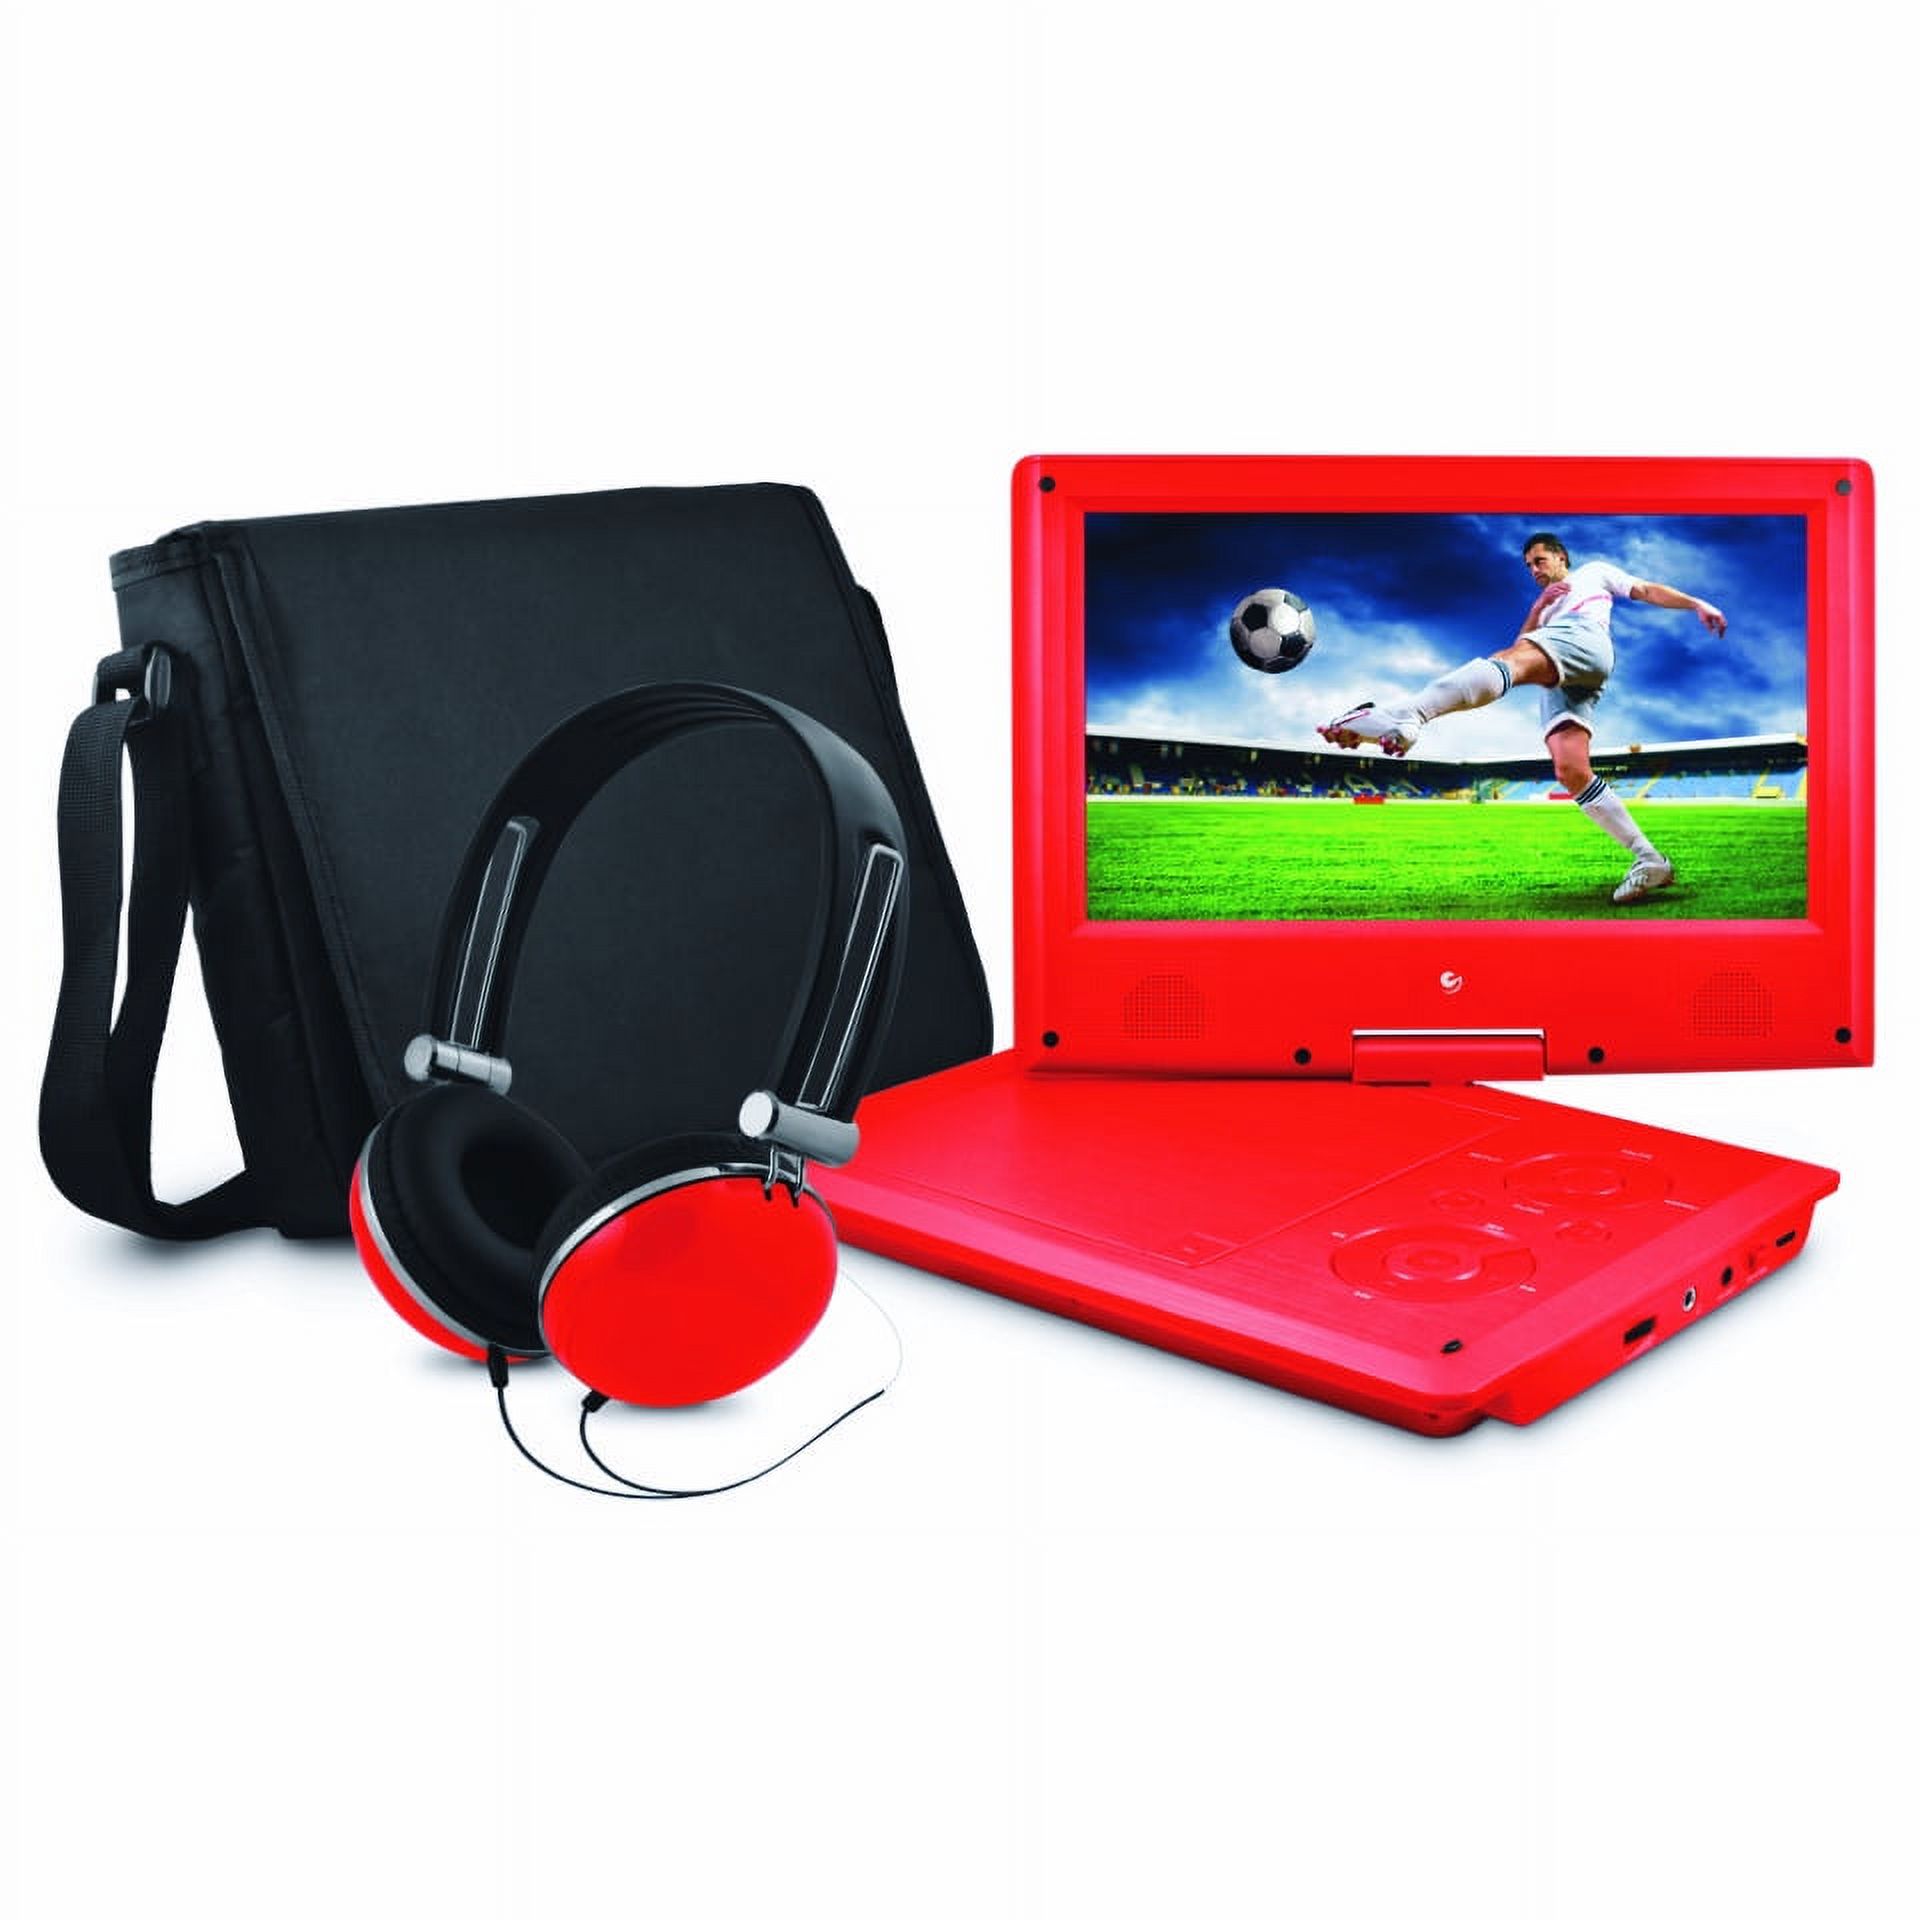 Ematic 9" Portable DVD Player with Matching Headphones and Bag - EPD909rd - image 1 of 6